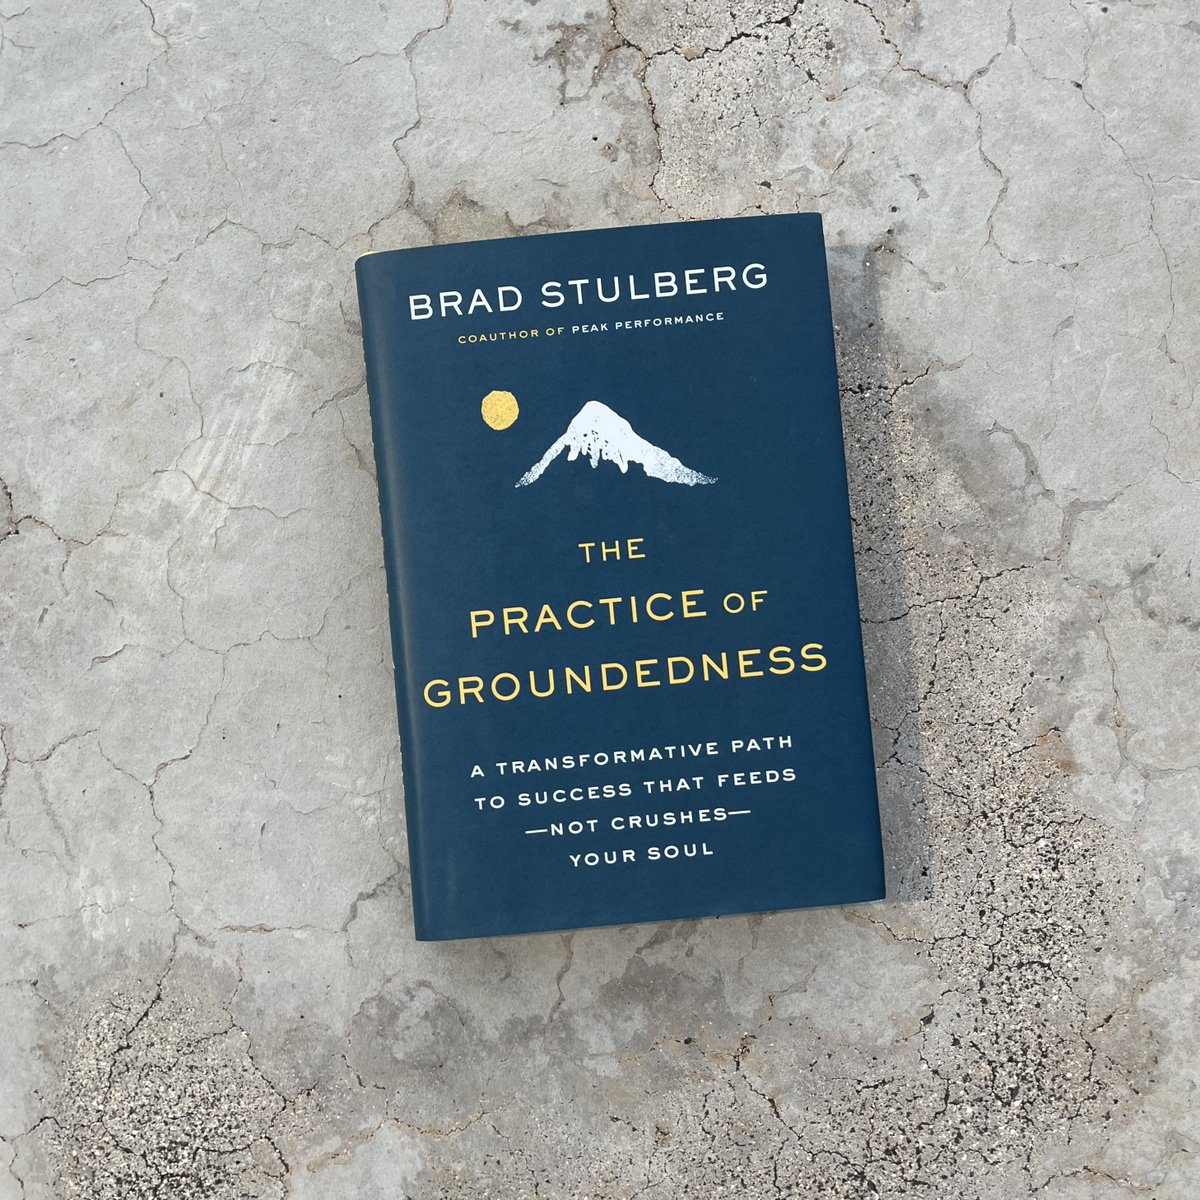 “A thoughtful, actionable book for pursuing more excellence with less angst.” – Adam Grant, author of Think Again

Discover a practical guide to achieving excellence with less stress in THE PRACTICE OF GROUNDEDNESS by @BradStulberg.